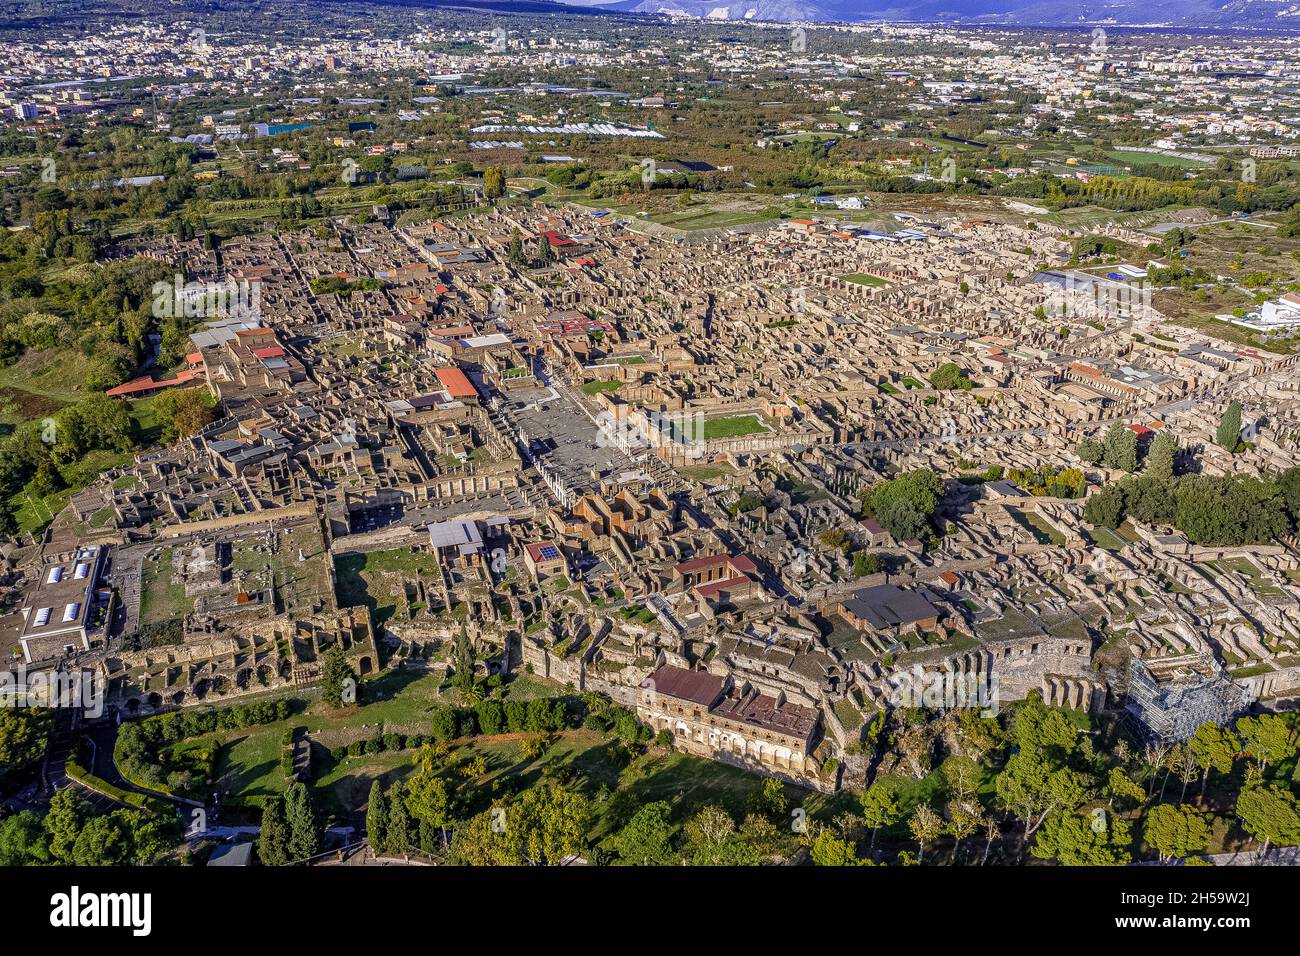 Pompei aus der Luft | Pompei from above with Drone Stock Photo